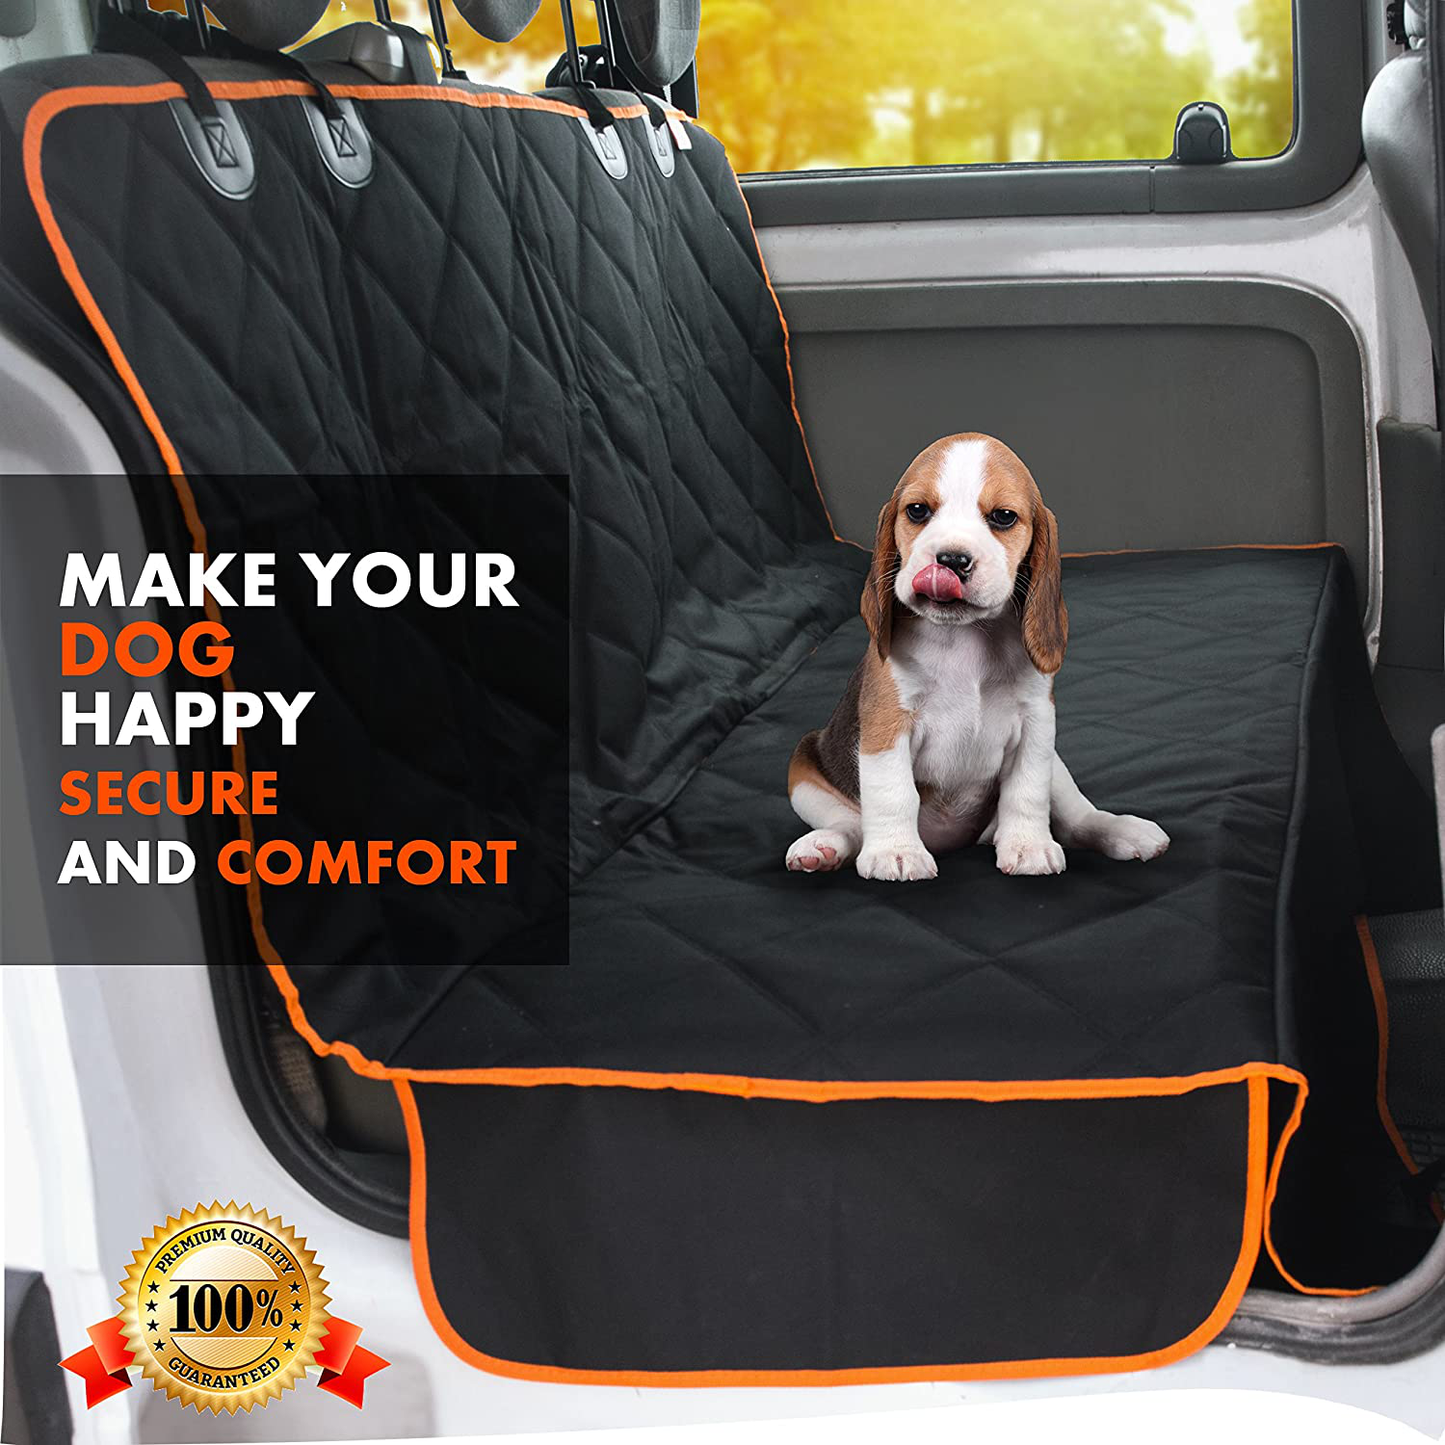 Doggie World Dog Car Seat Cover - Cars, Trucks and Suvs Luxury Full Protector, W/Extra Side Flaps, Seat Belt Openings - Hammock Convertible for Your Pet - Waterproof, Non-Slip - Machine Washable Animals & Pet Supplies > Pet Supplies > Dog Supplies > Dog Treadmills Doggie World   